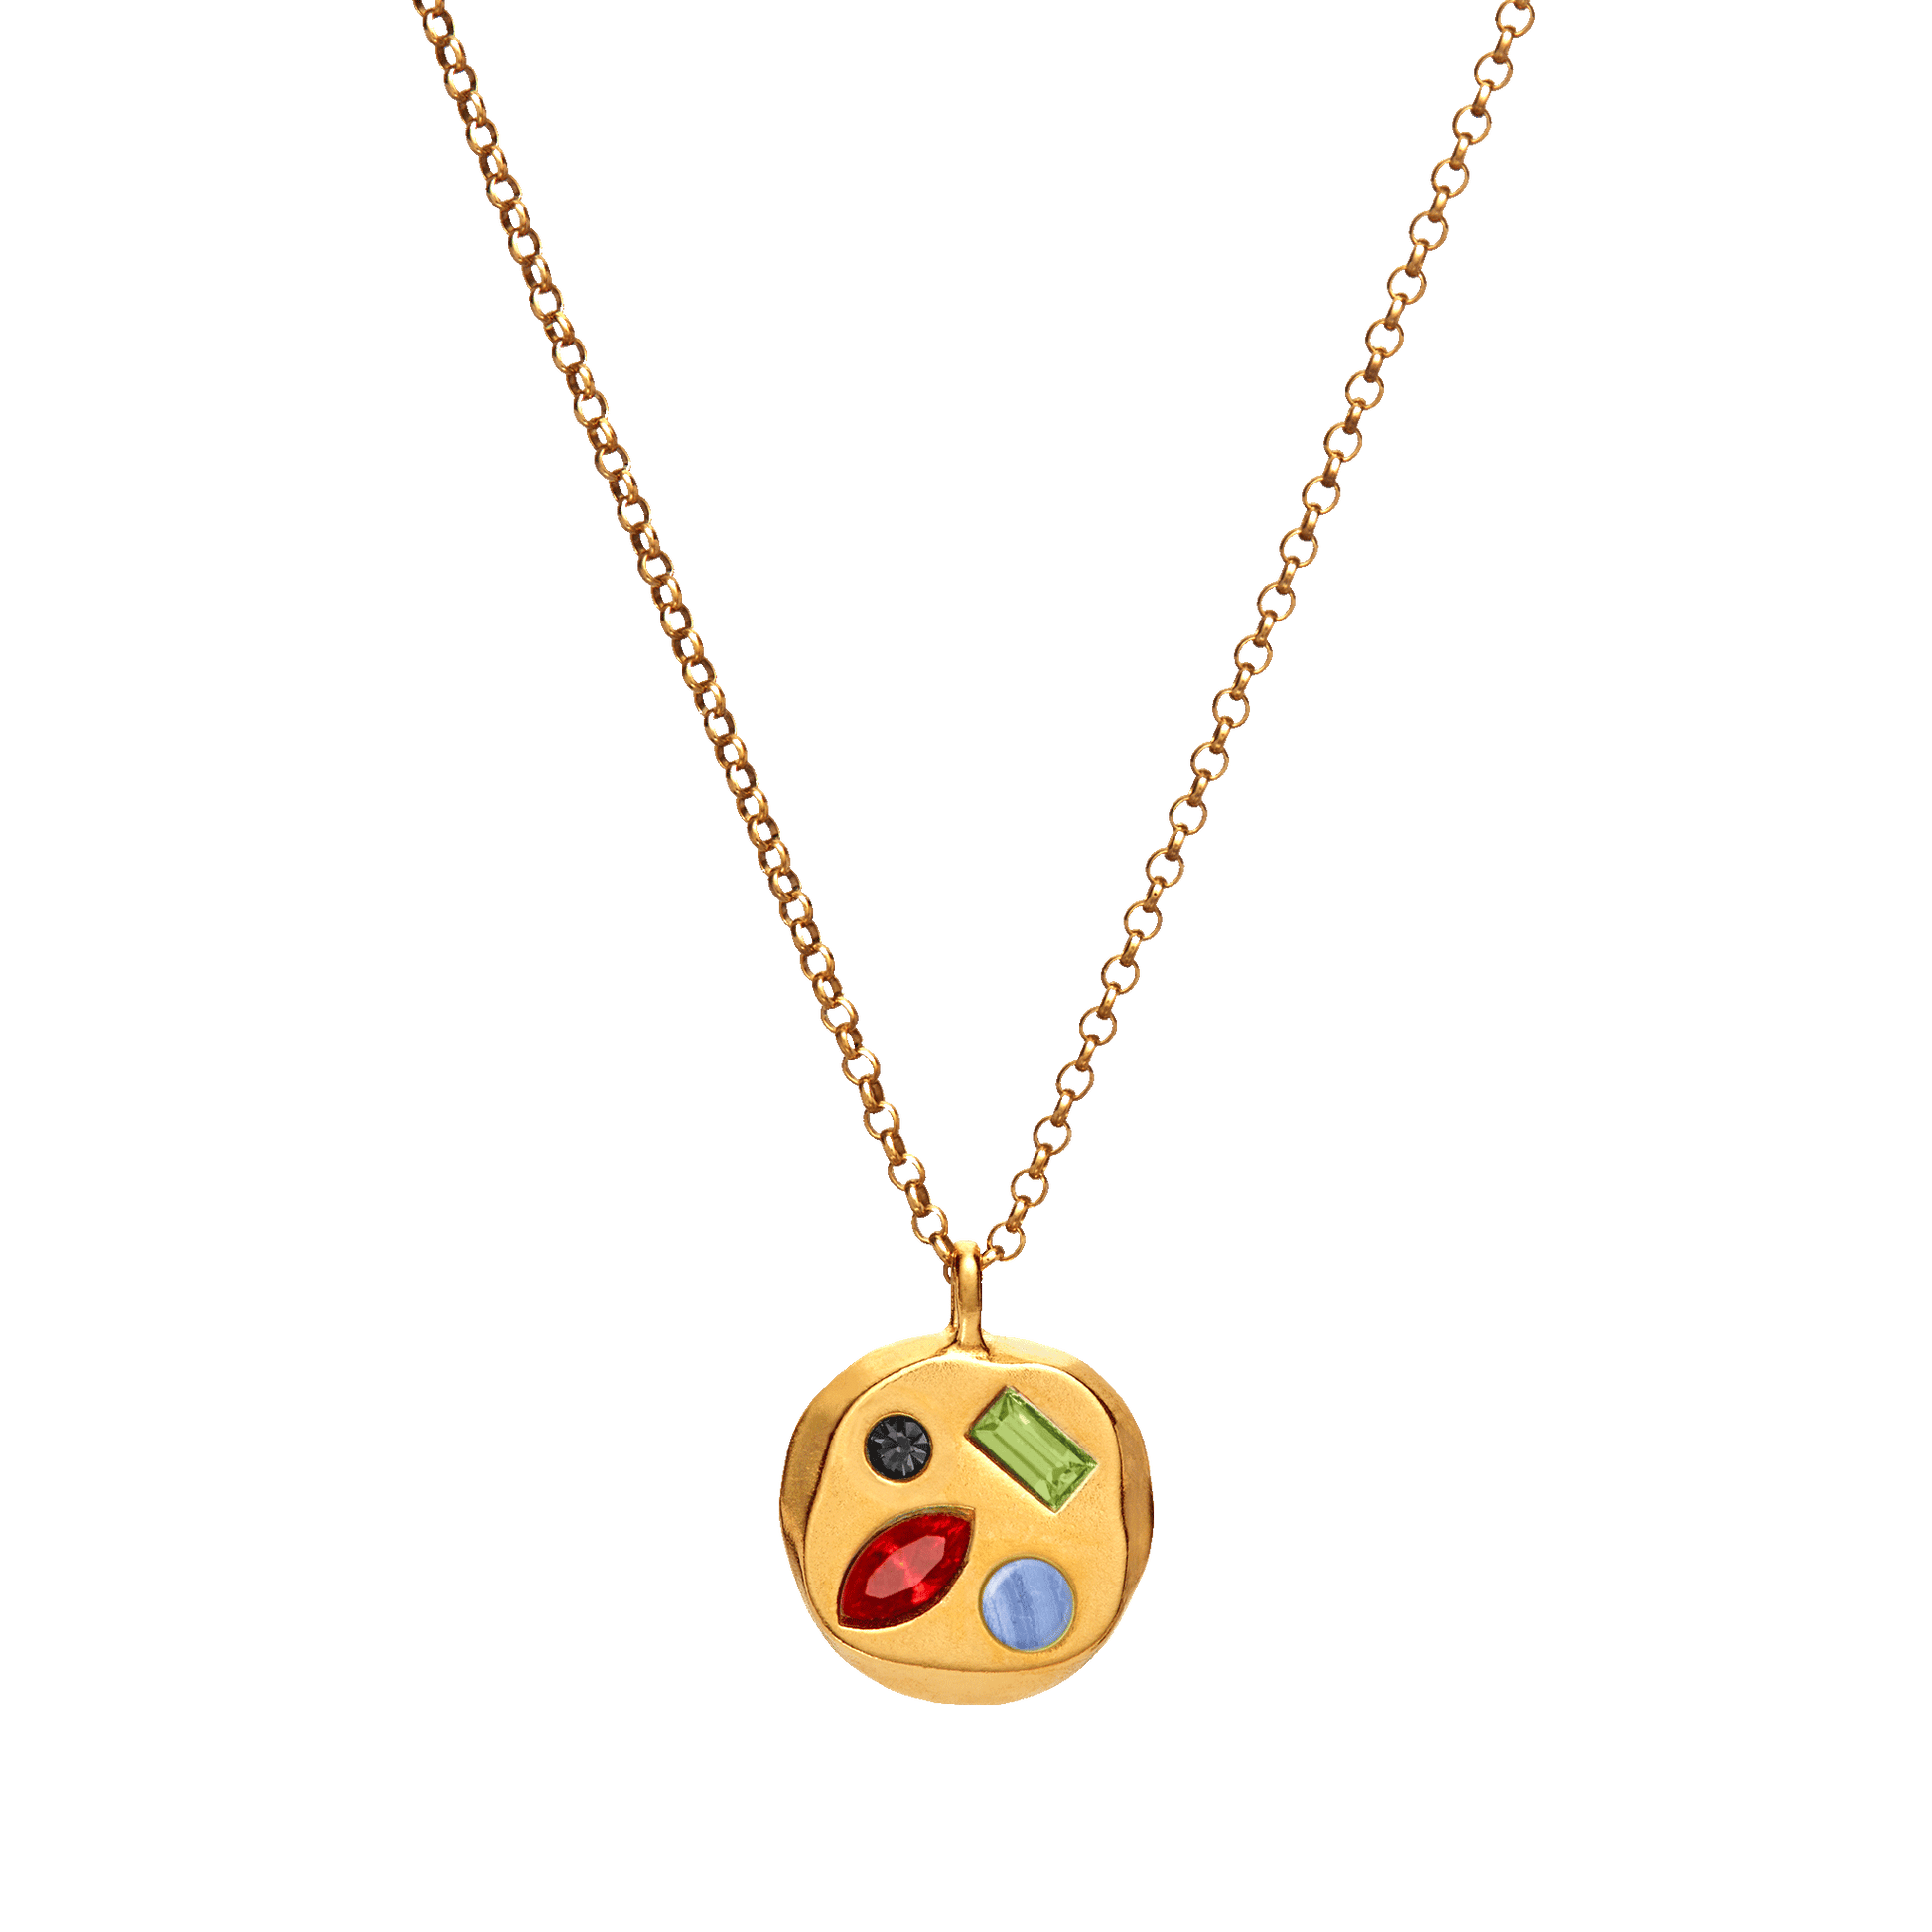 The July Fifth Pendant